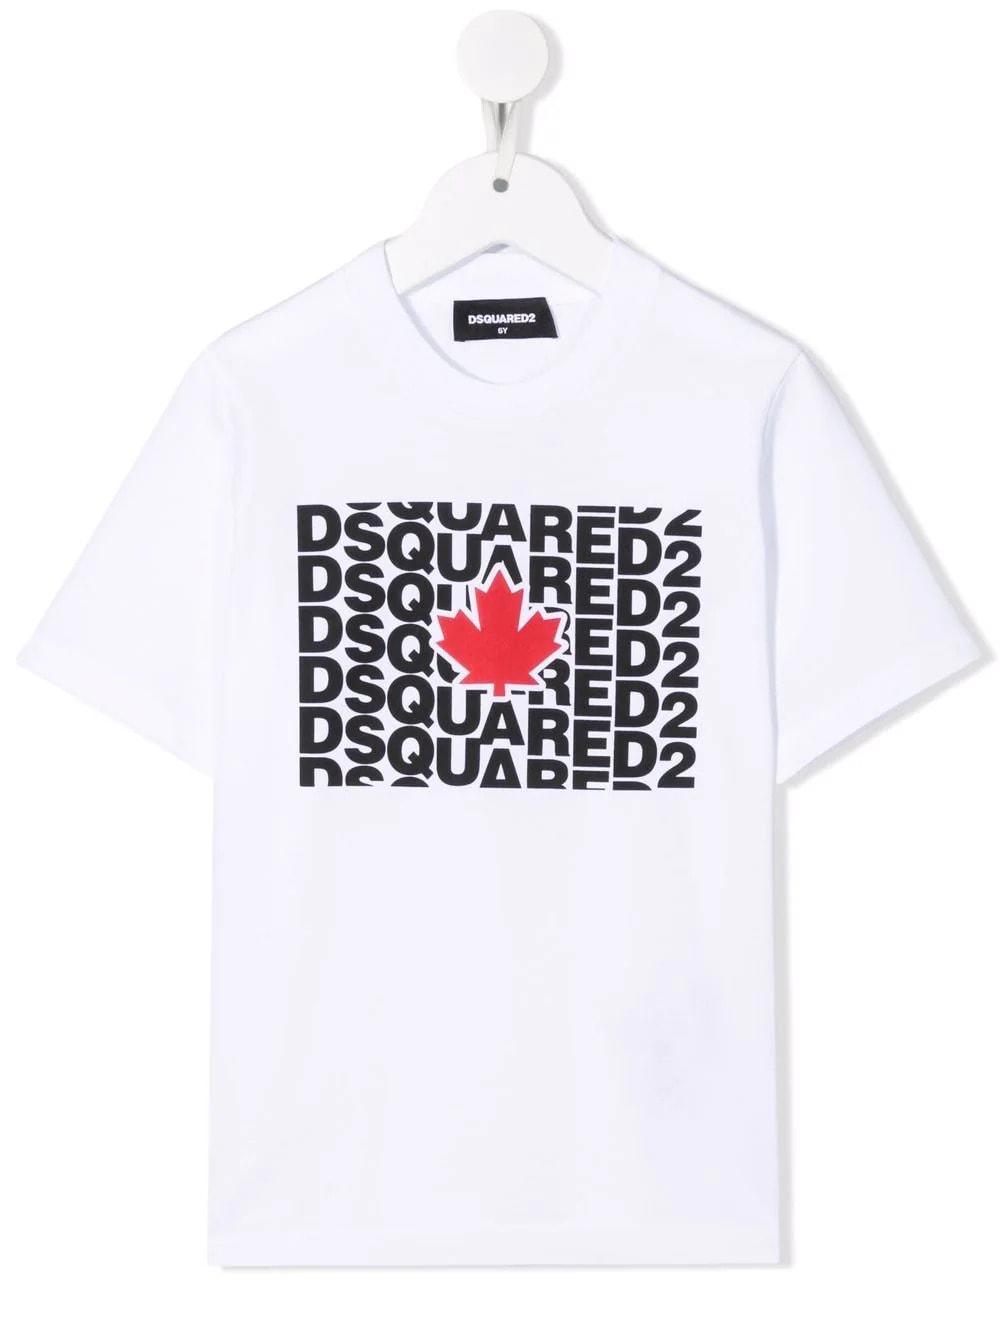 Kids White T-shirt With Dsquared2 Rectangular Print With Maple Leaf